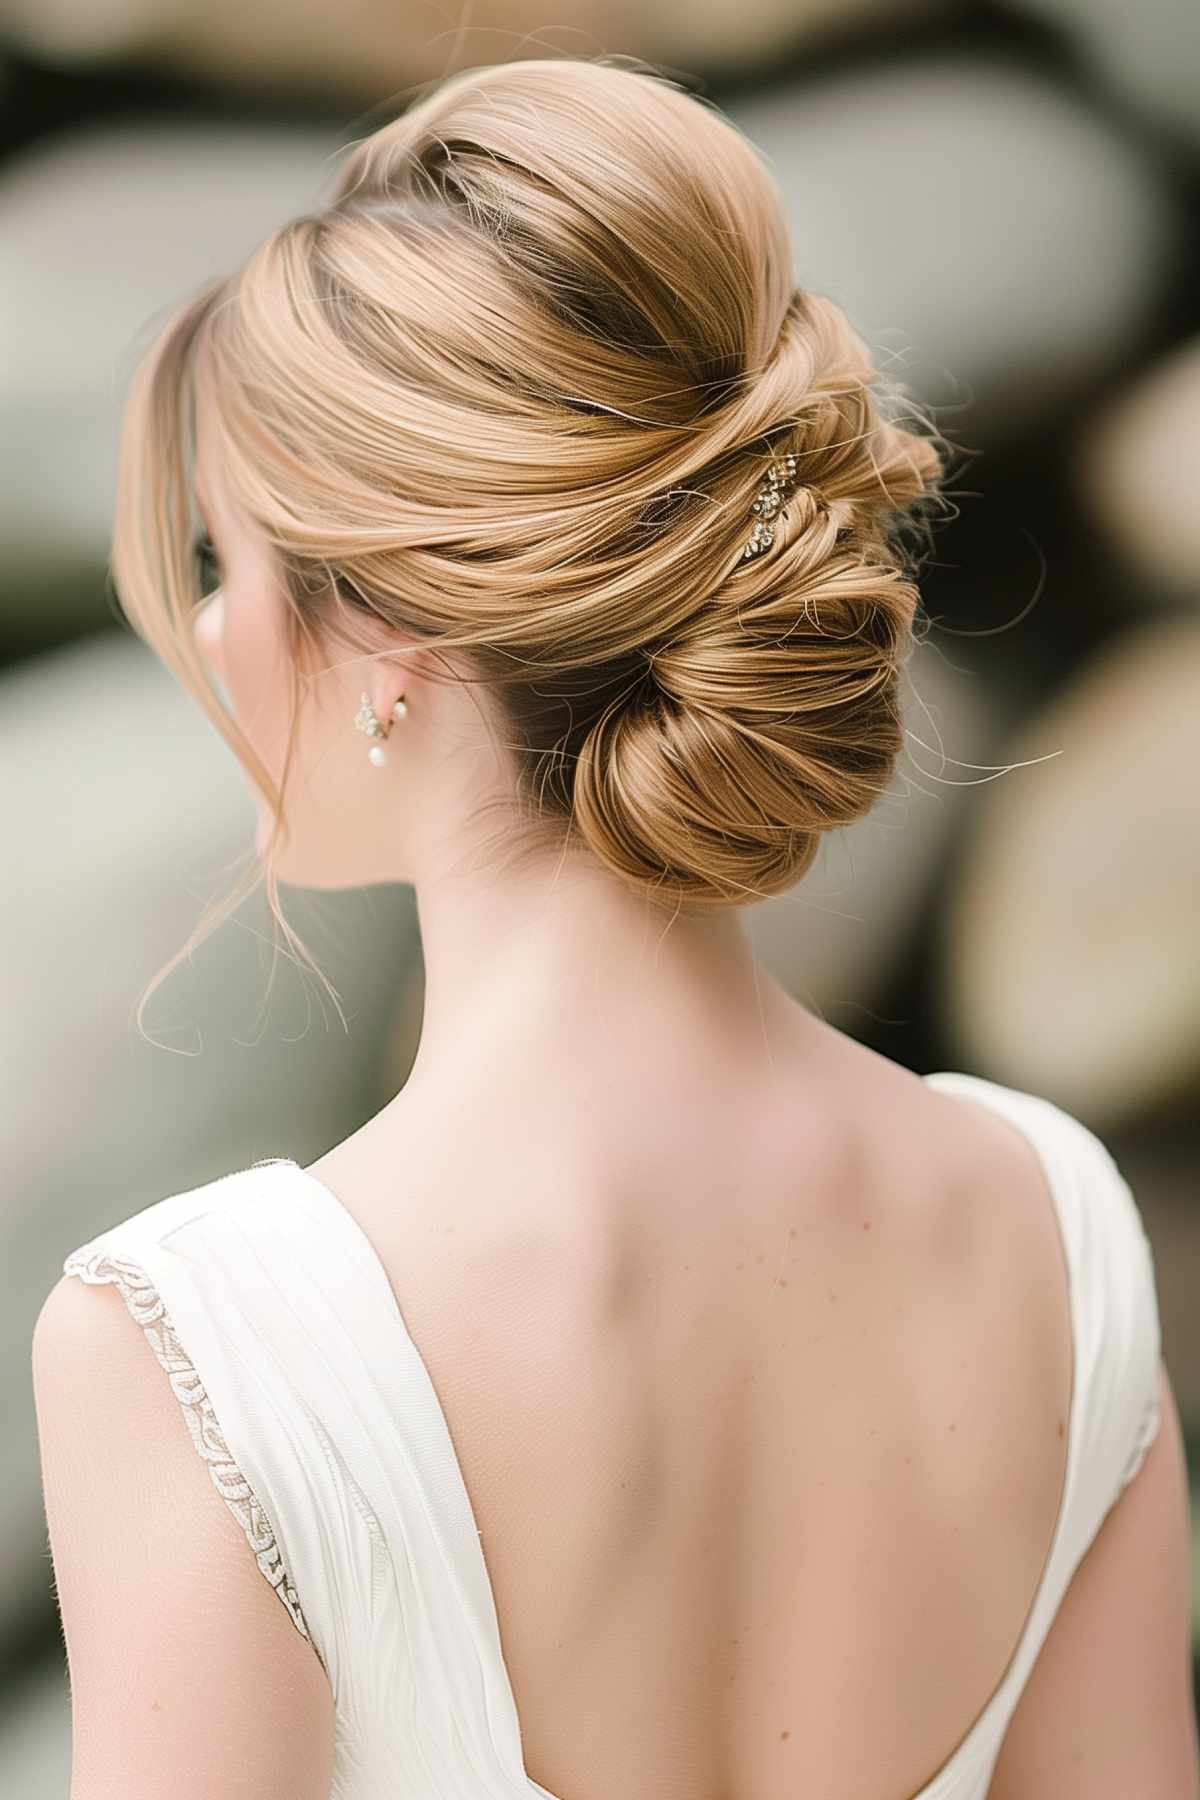 Elegant French twist hairstyle on a woman with medium hair, enhanced with a decorative pin, perfect for formal occasions.